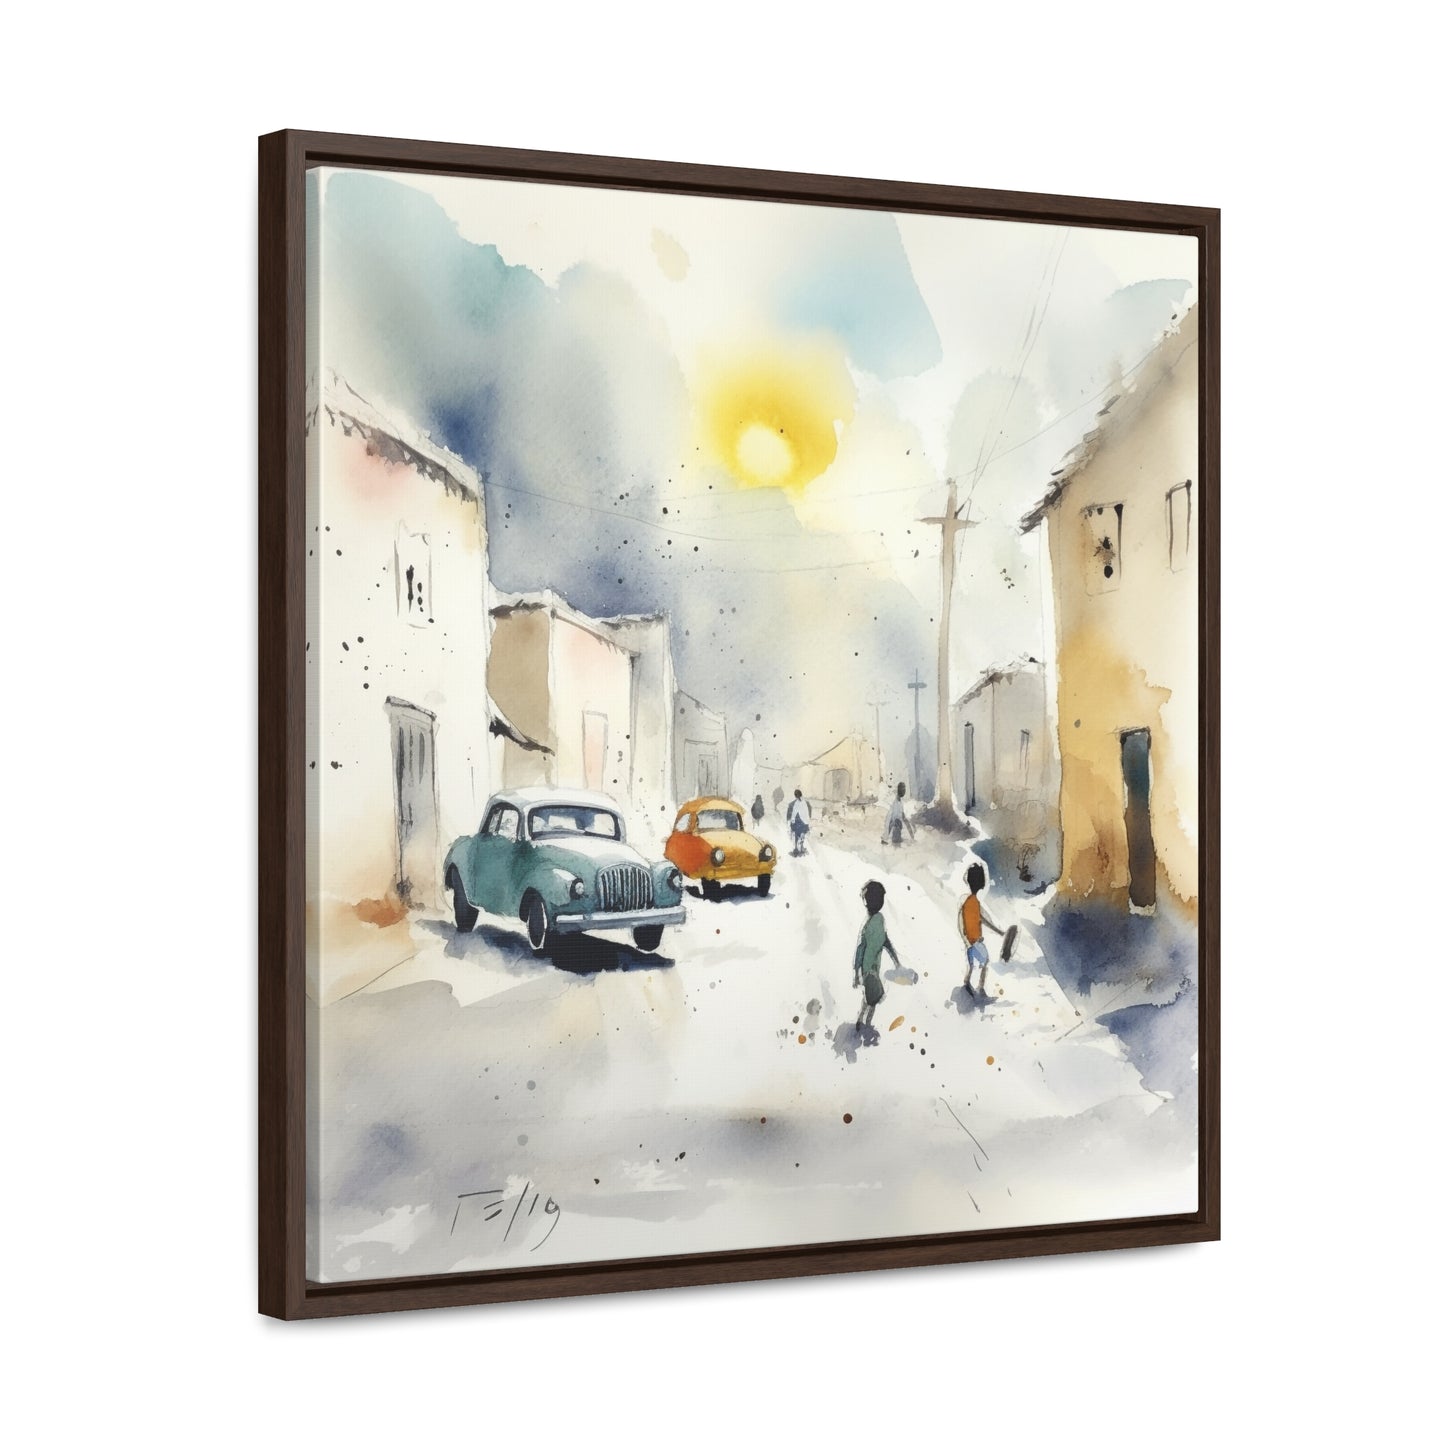 Childhood 5, Gallery Canvas Wraps, Square Frame